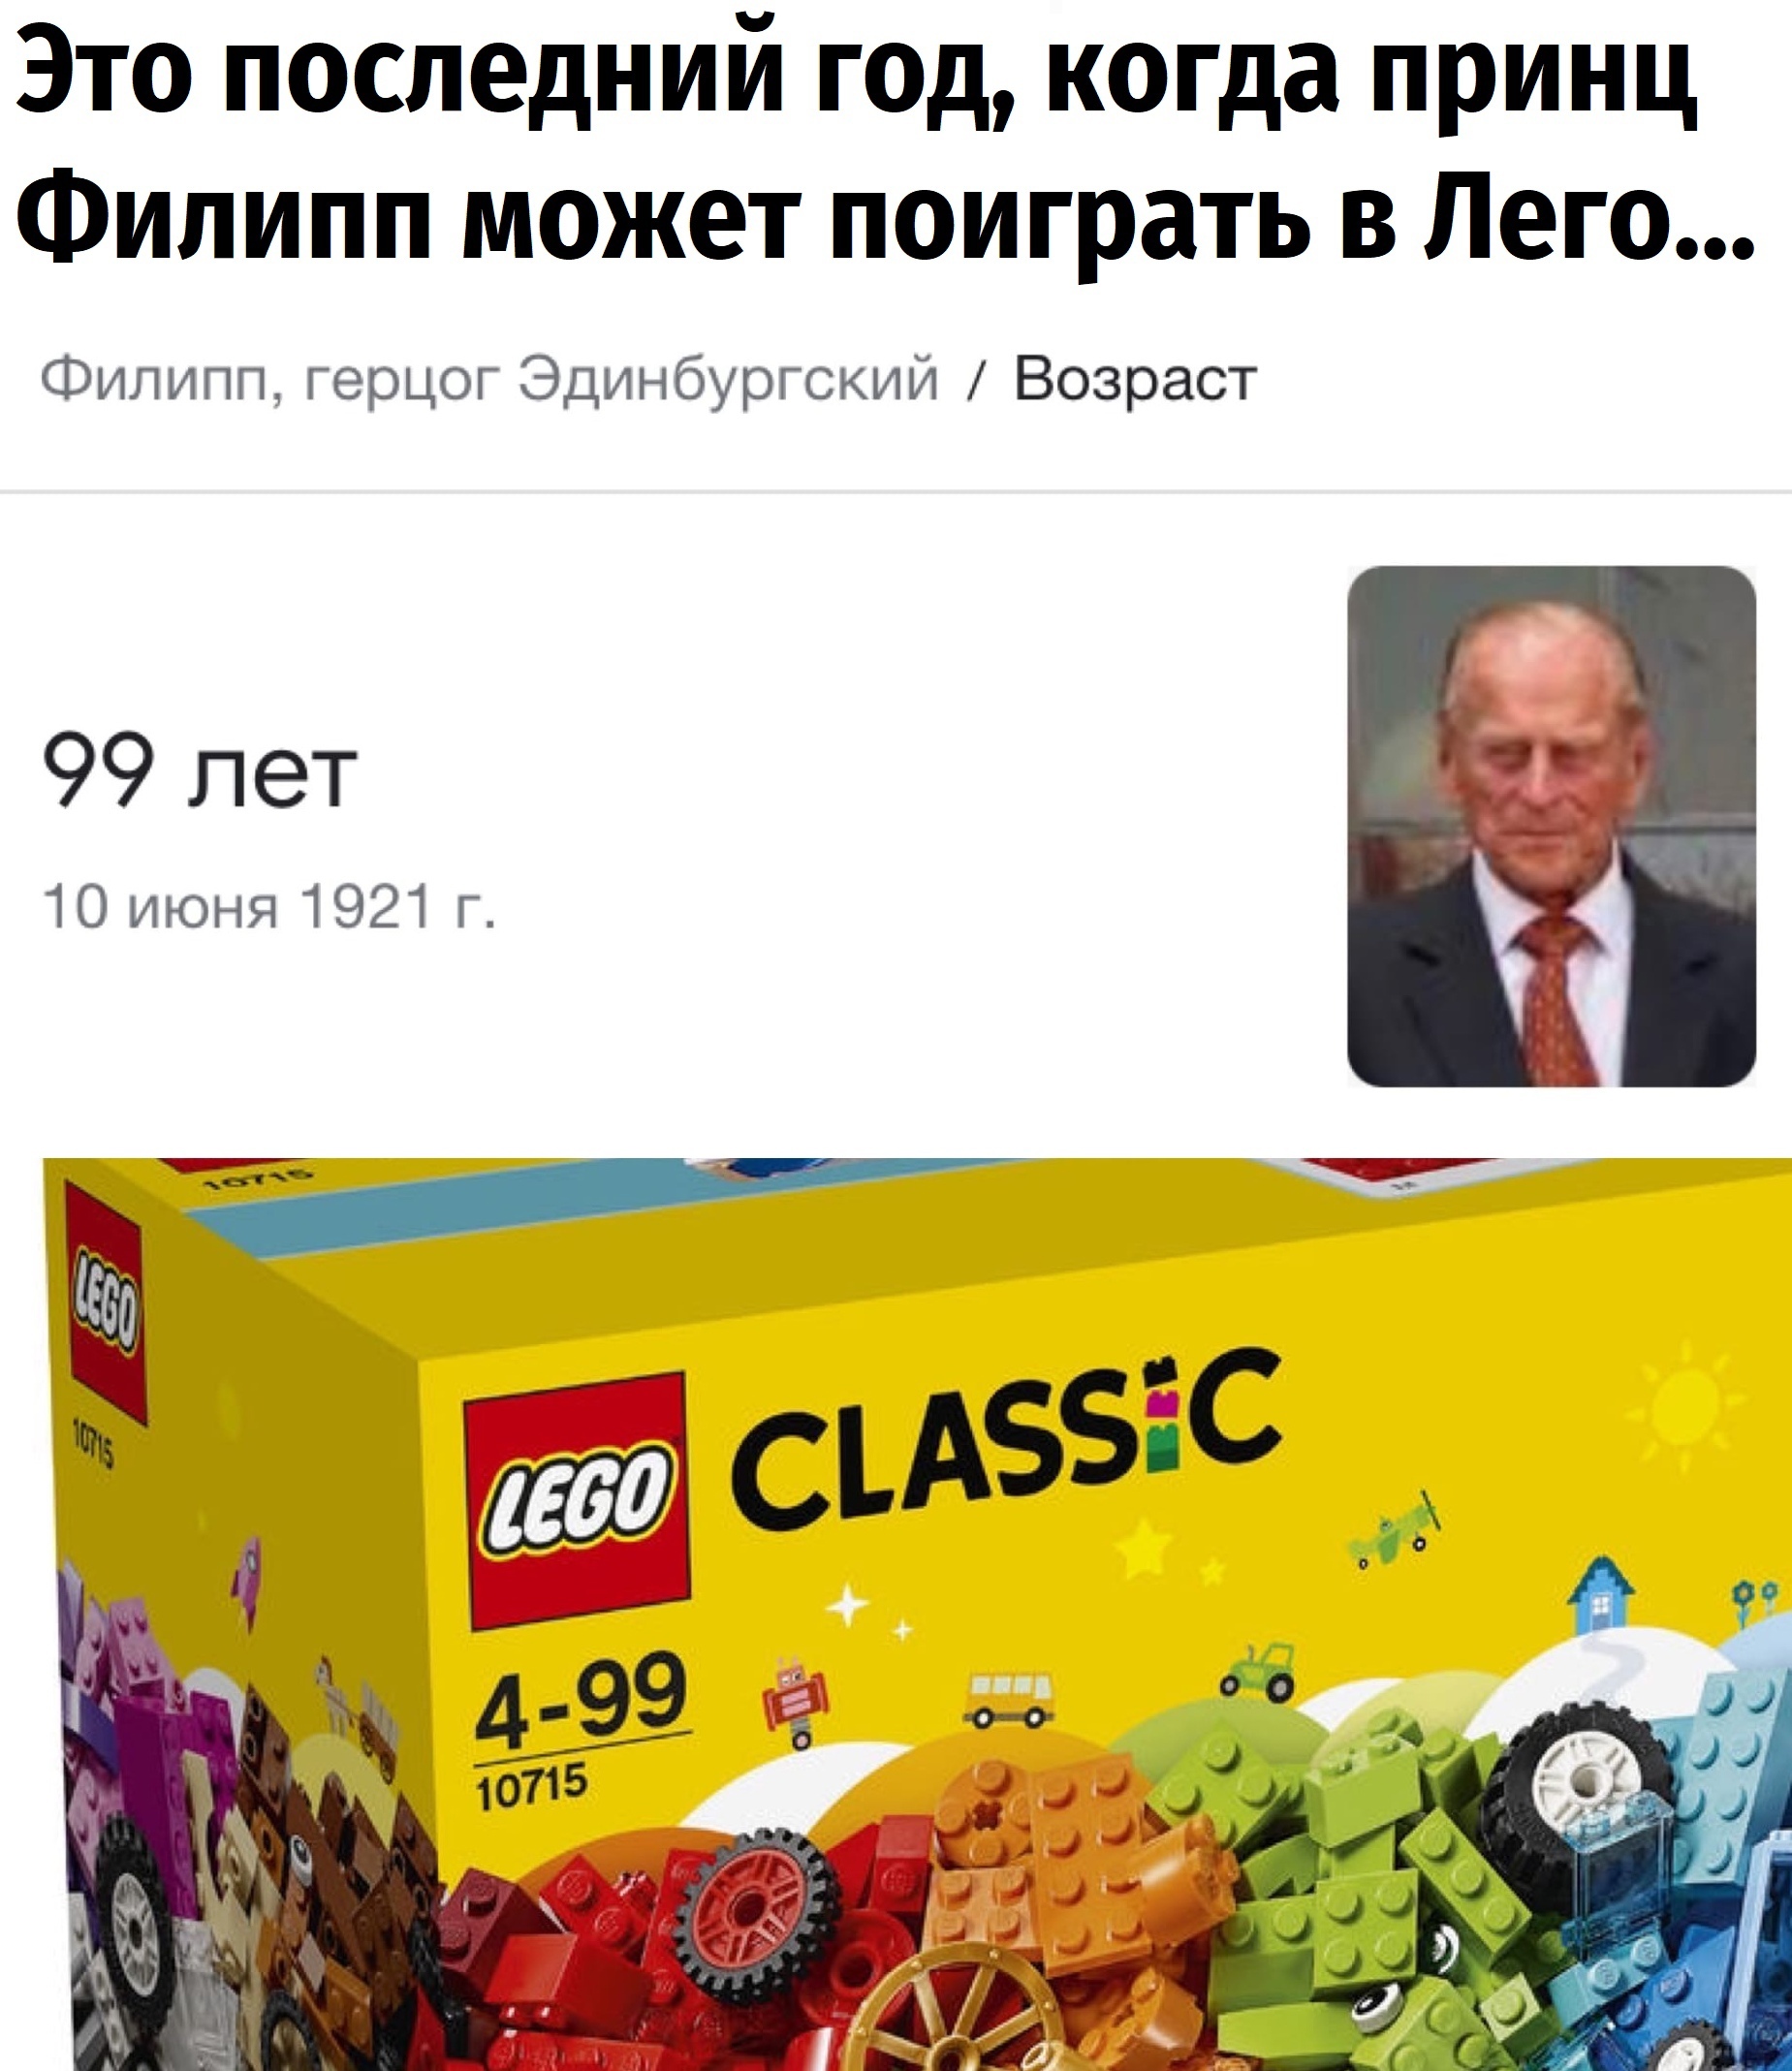 Annoying - Humor, Prince Philip, Lego, Age restrictions, Picture with text